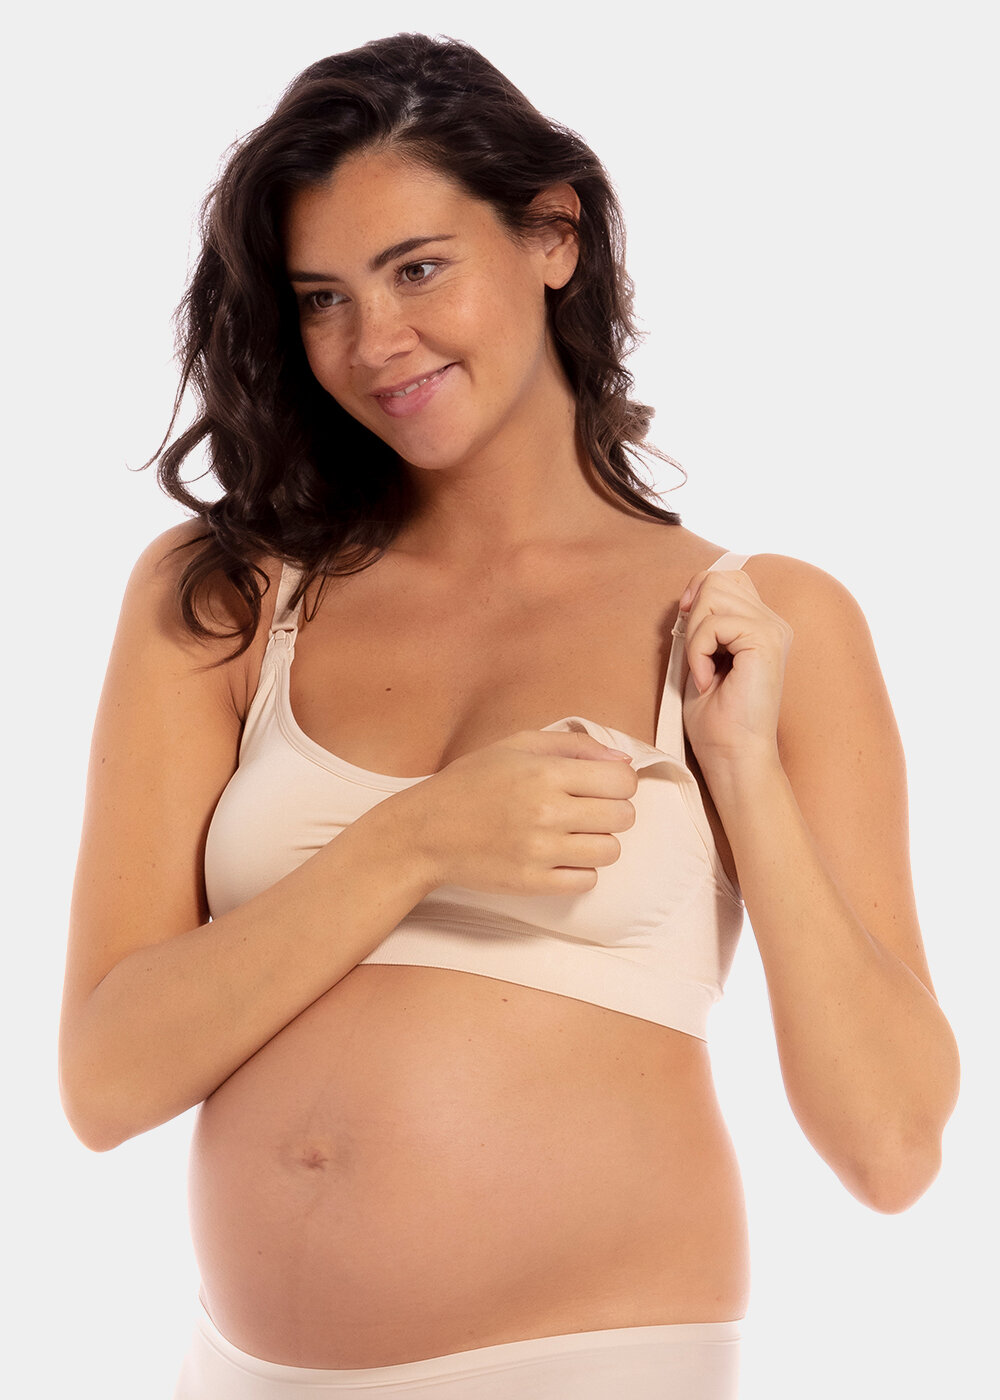 Nursing Bra With Front Open Easy Access, Comfortable Maternity